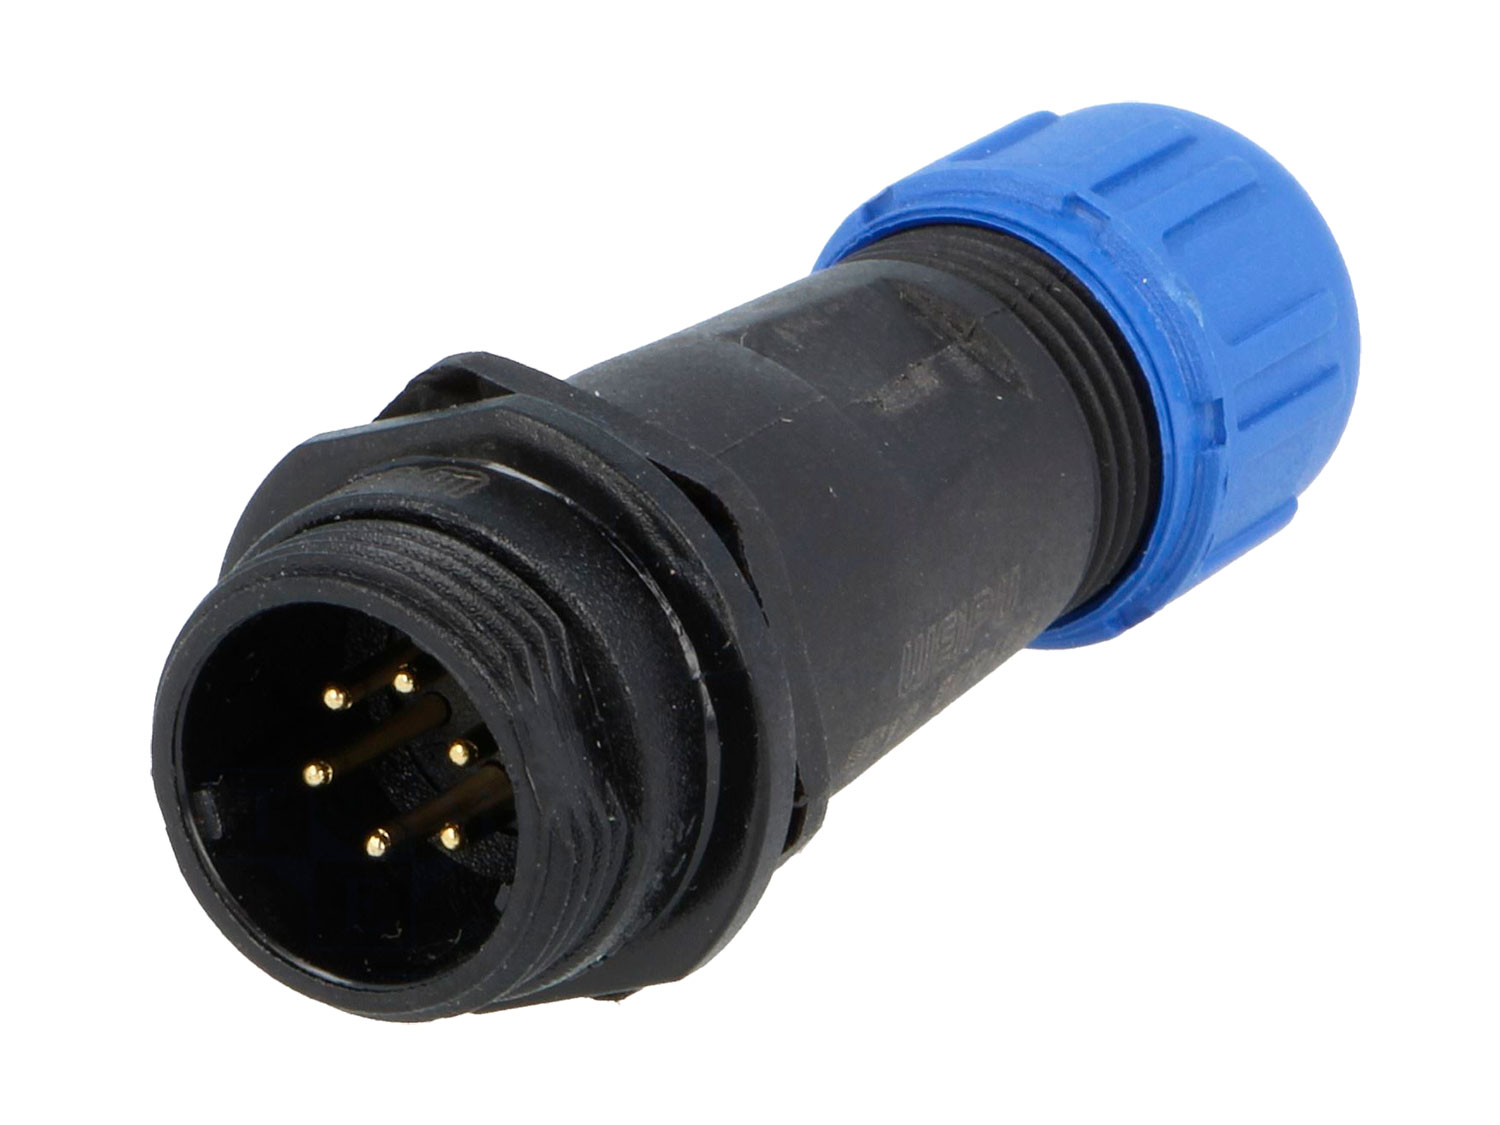 WEIPU SP13 Series IP68 - F6 Contacts Ø13 Waterproof Male Cable-Mount Connector - IP68 - FM686846 - SP1311/P6I-N